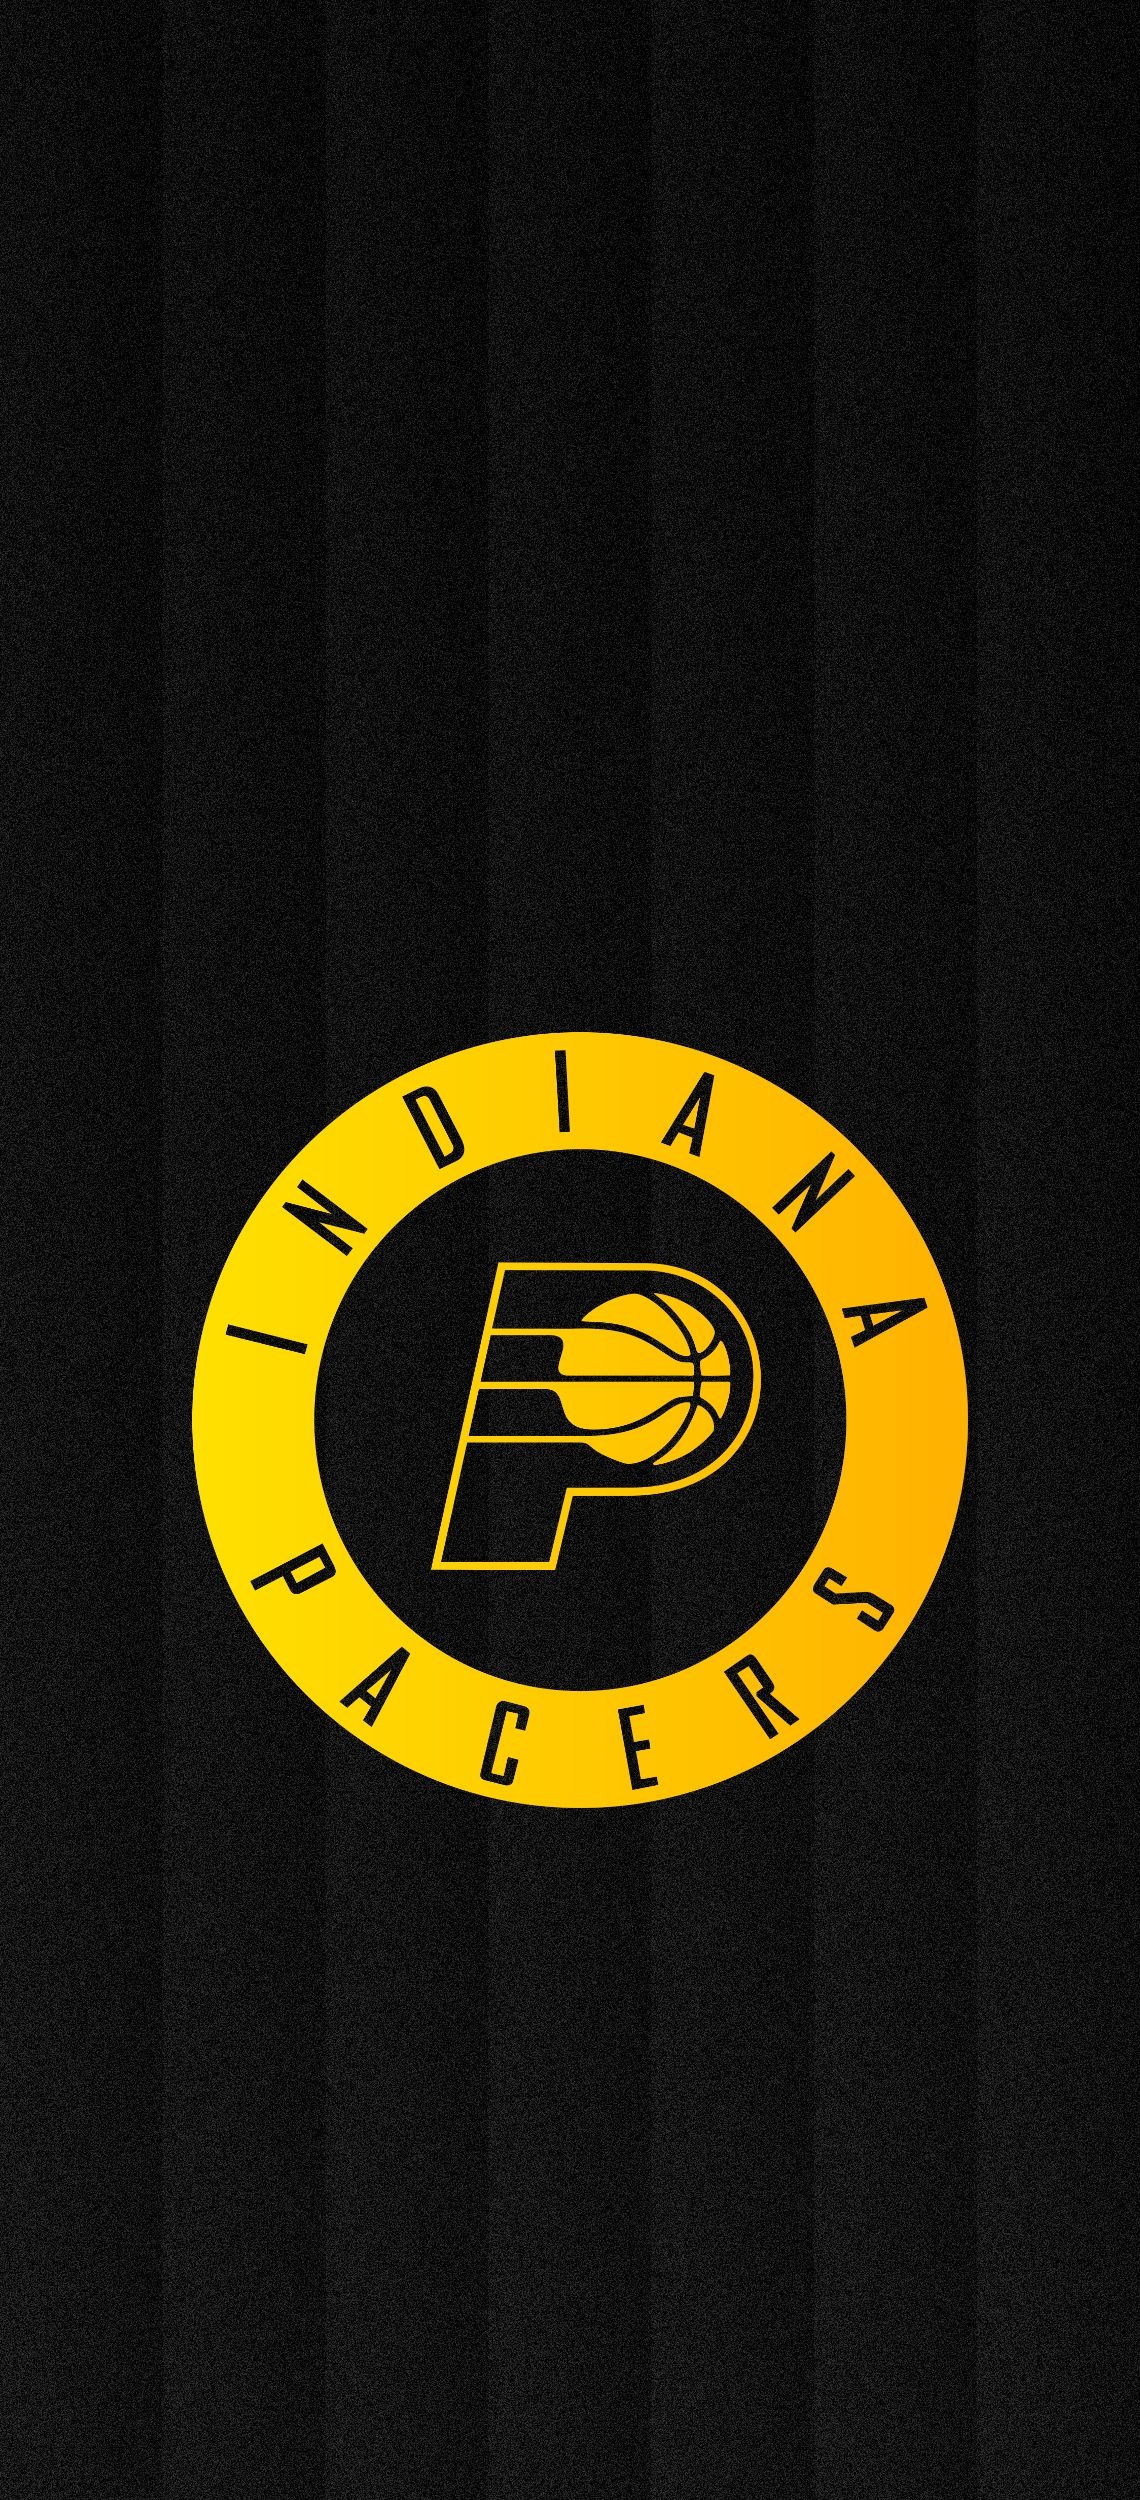 Indiana Pacers, Pacers wallpaper, NBA wallpapers, Basketball backgrounds, 1140x2500 HD Handy